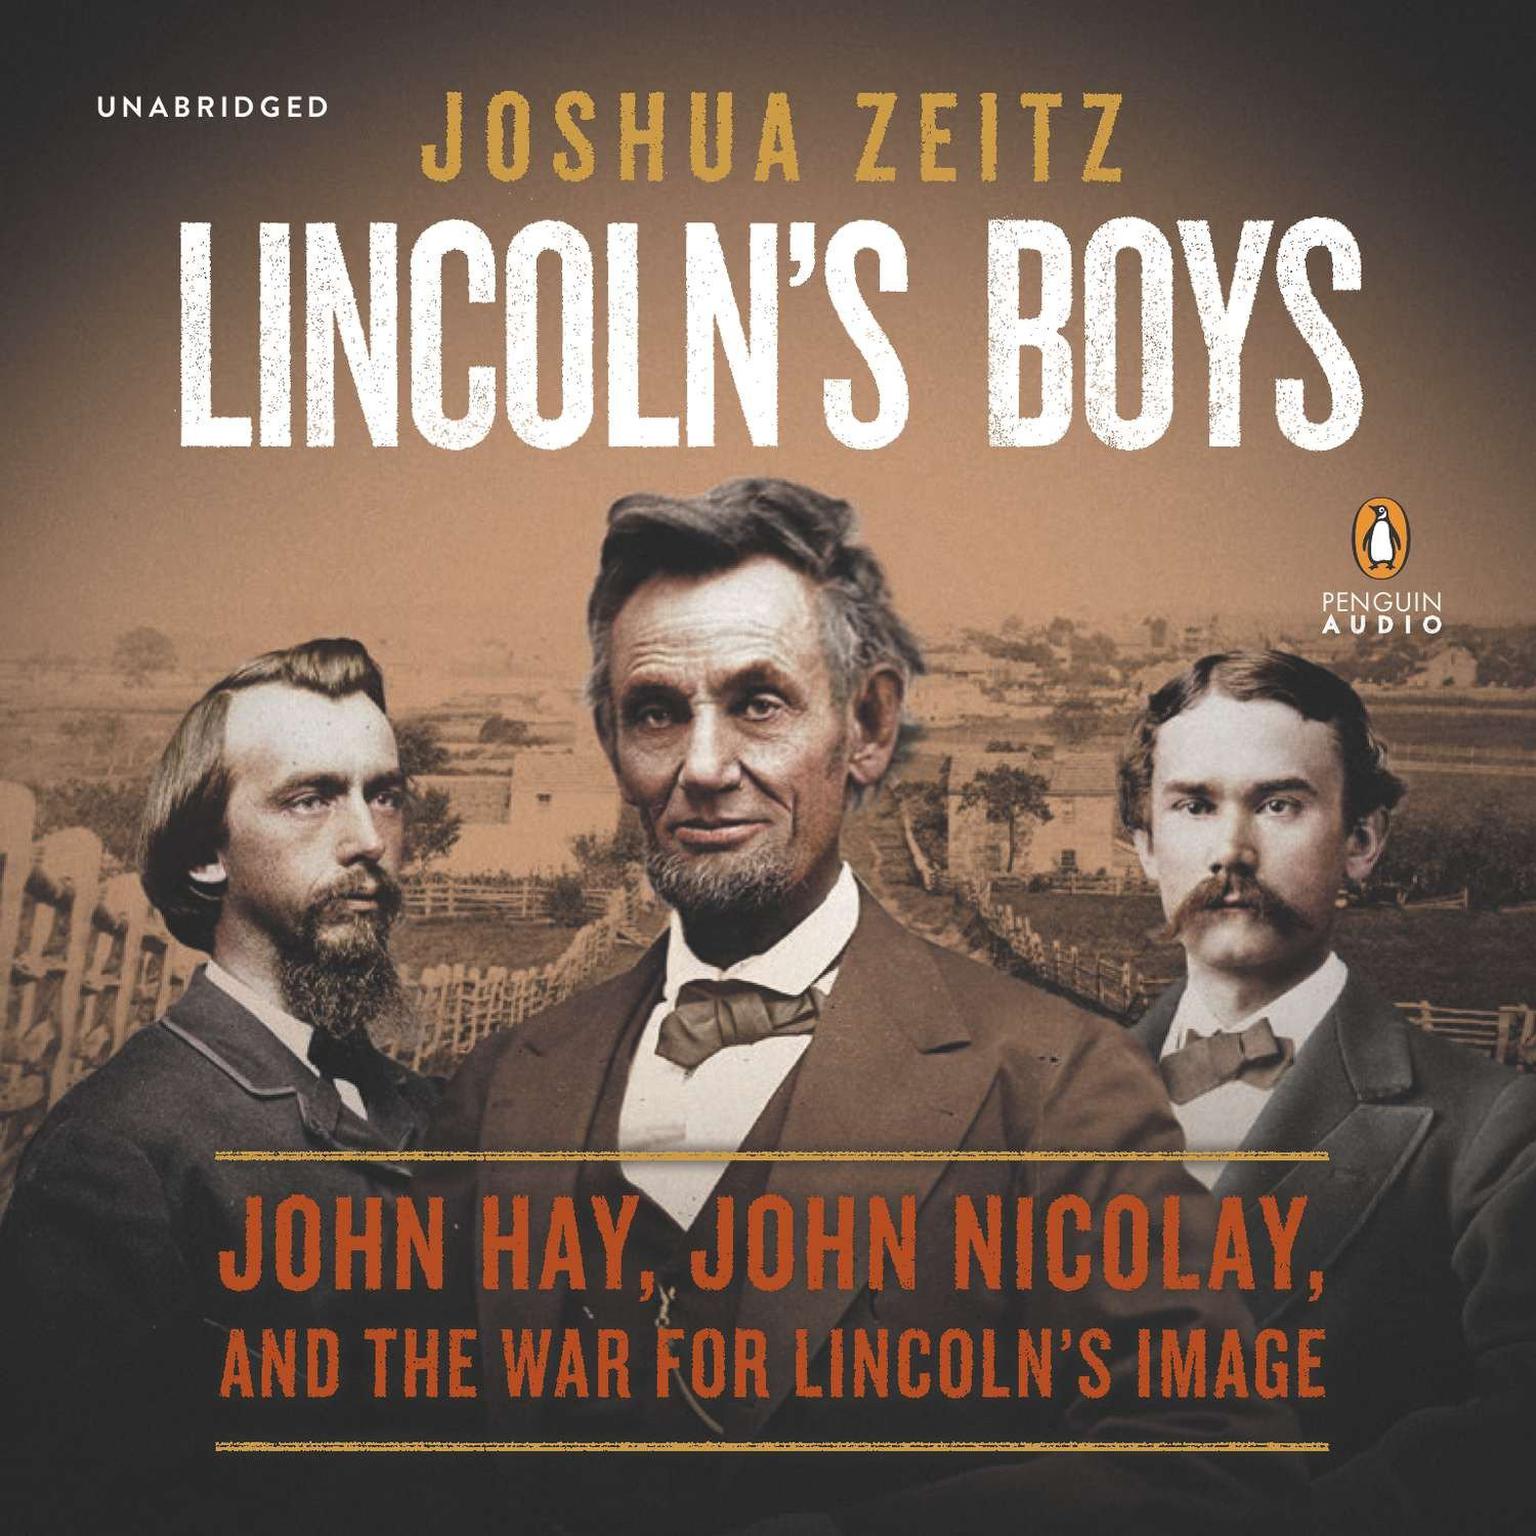 Lincolns Boys: John Hay, John Nicolay, and the War for Lincoln’s Image Audiobook, by Joshua Zeitz